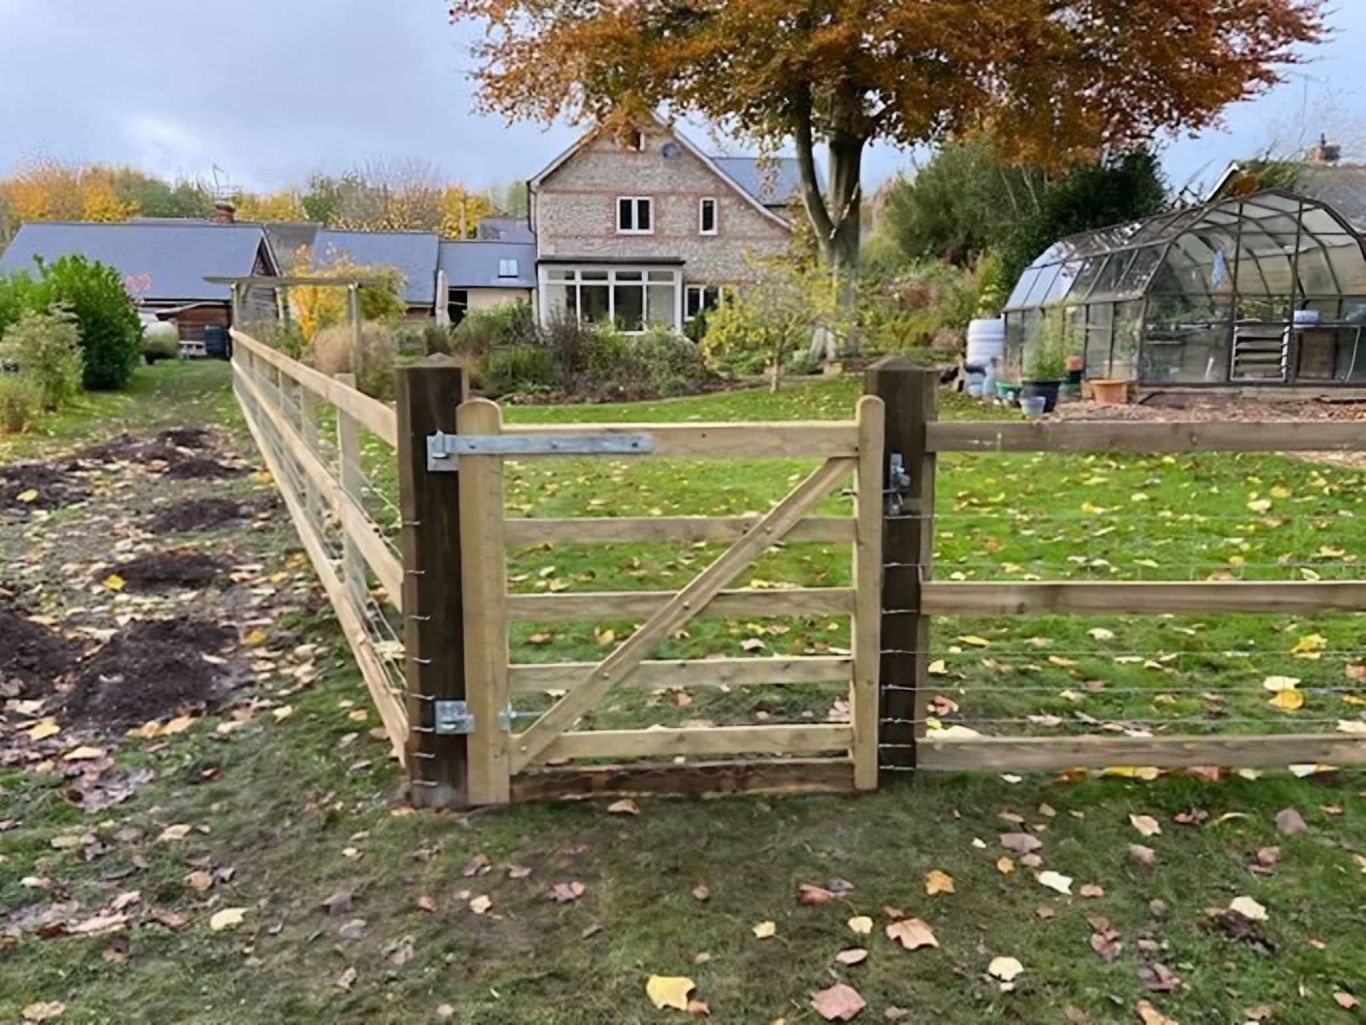 Long post fencing with gate completed.